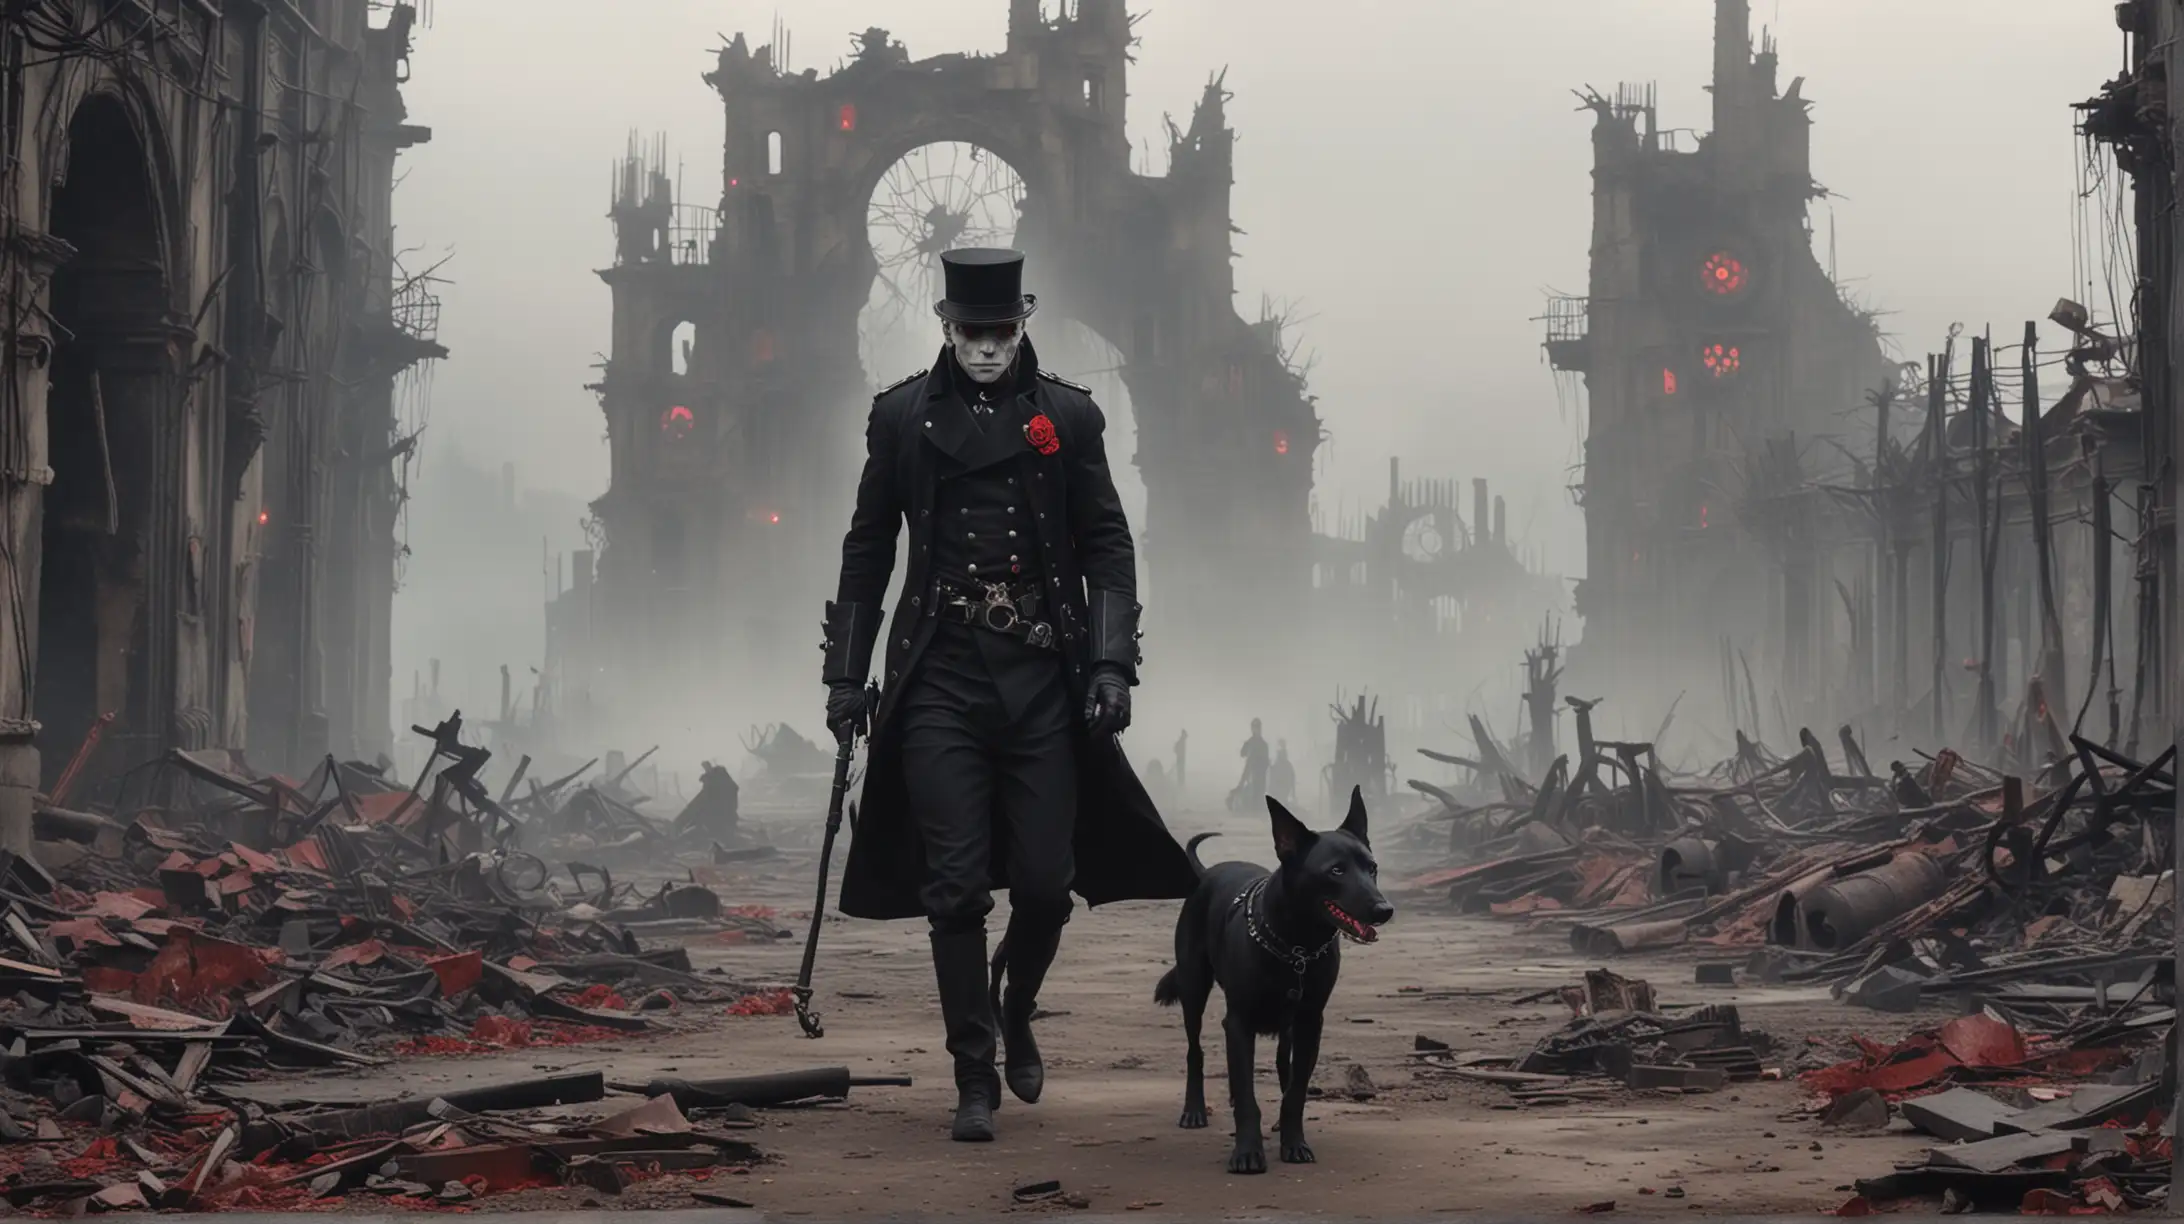 Pale Man and RedEyed Dog Explore Steampunk City Ruins in Fog